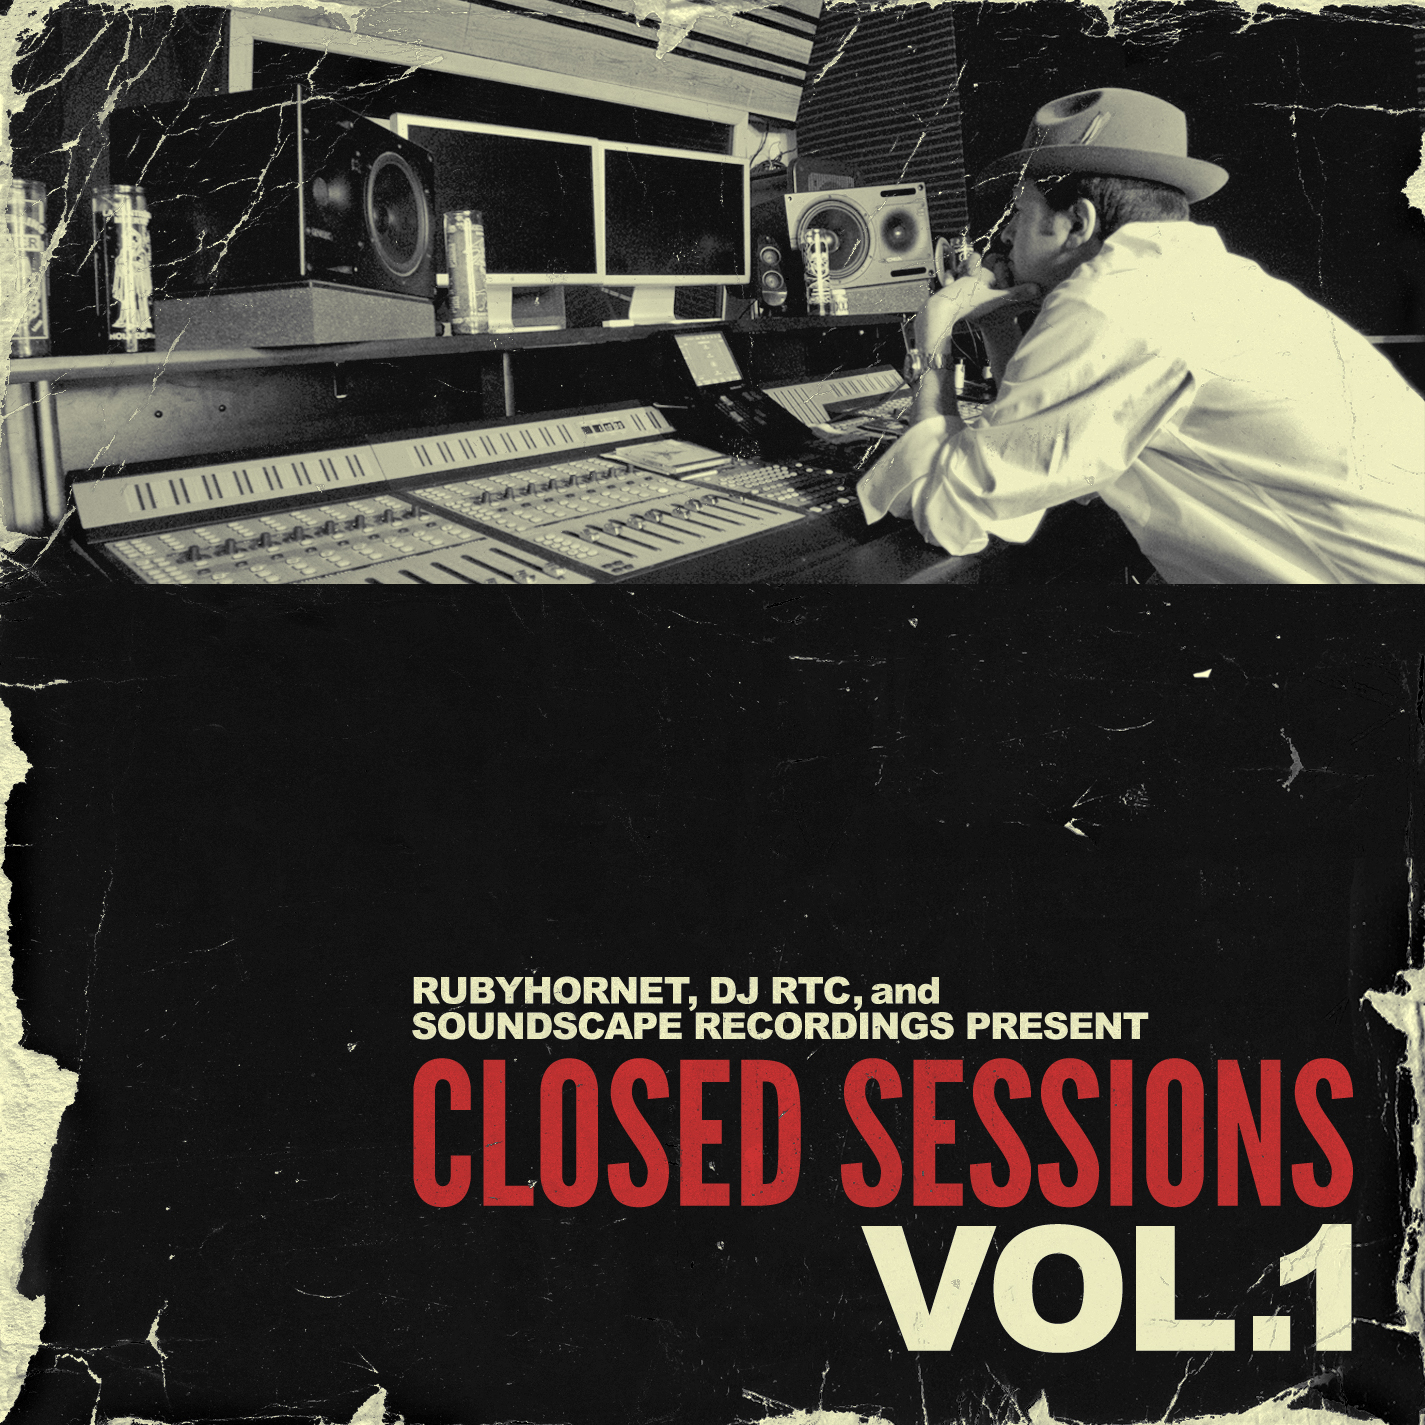 Closed Sessions